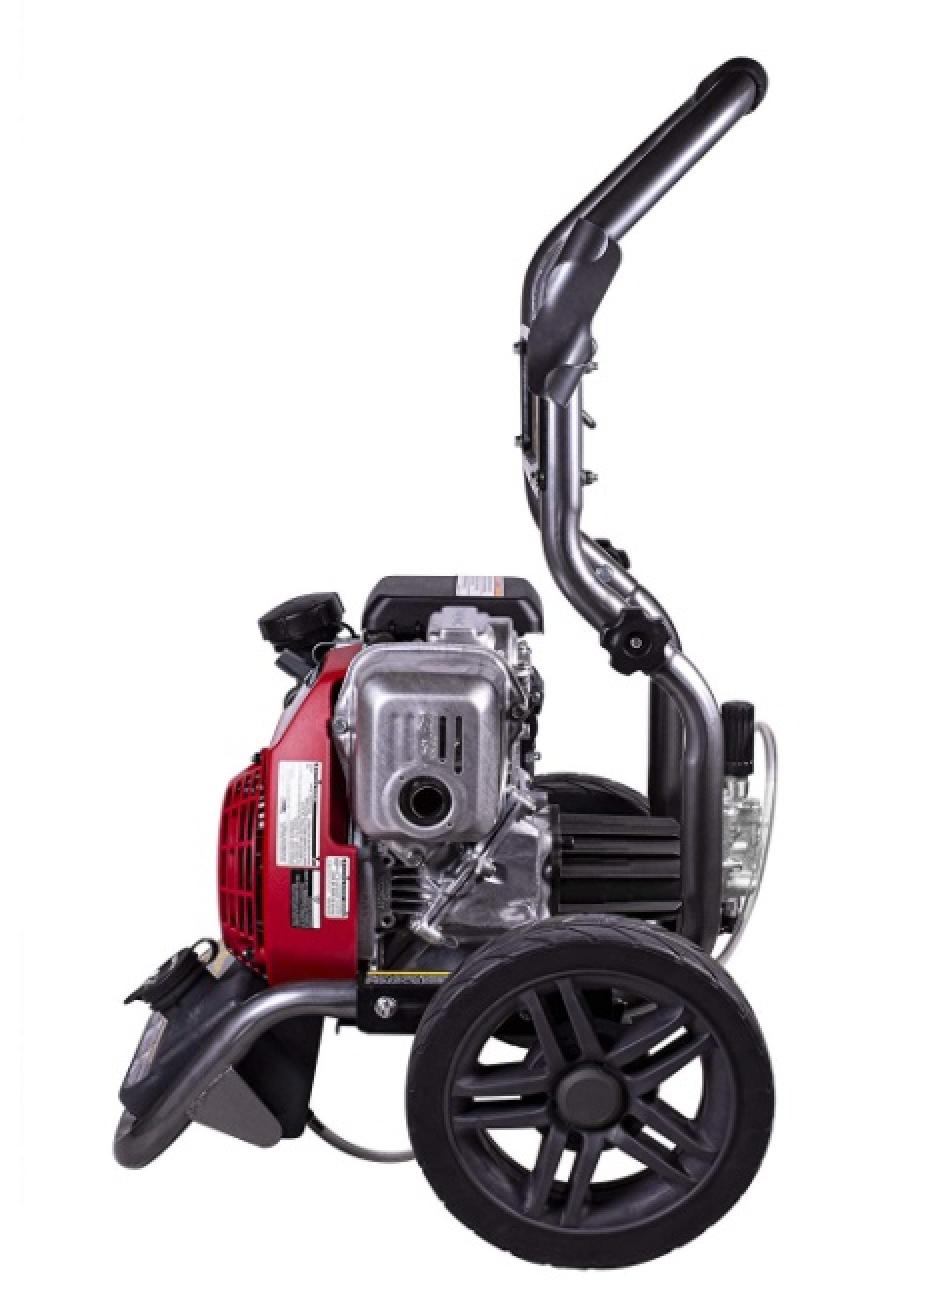 BE Power Equipment Pressure Washer 2700 PSI Side